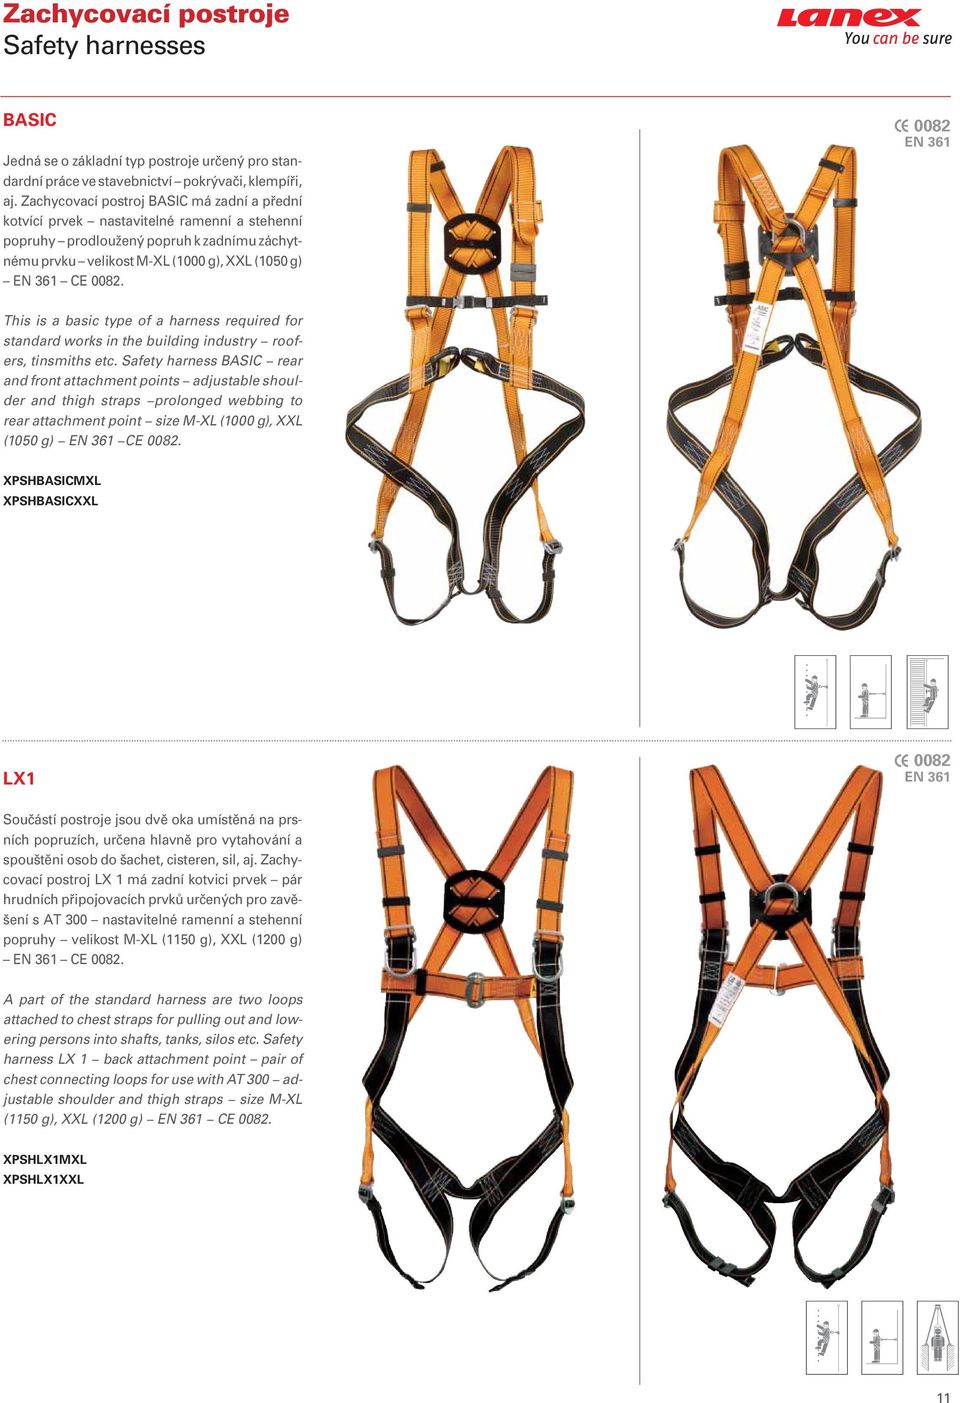 EN 361 This is a basic type of a harness required for standard works in the building industry roofers, tinsmiths etc.